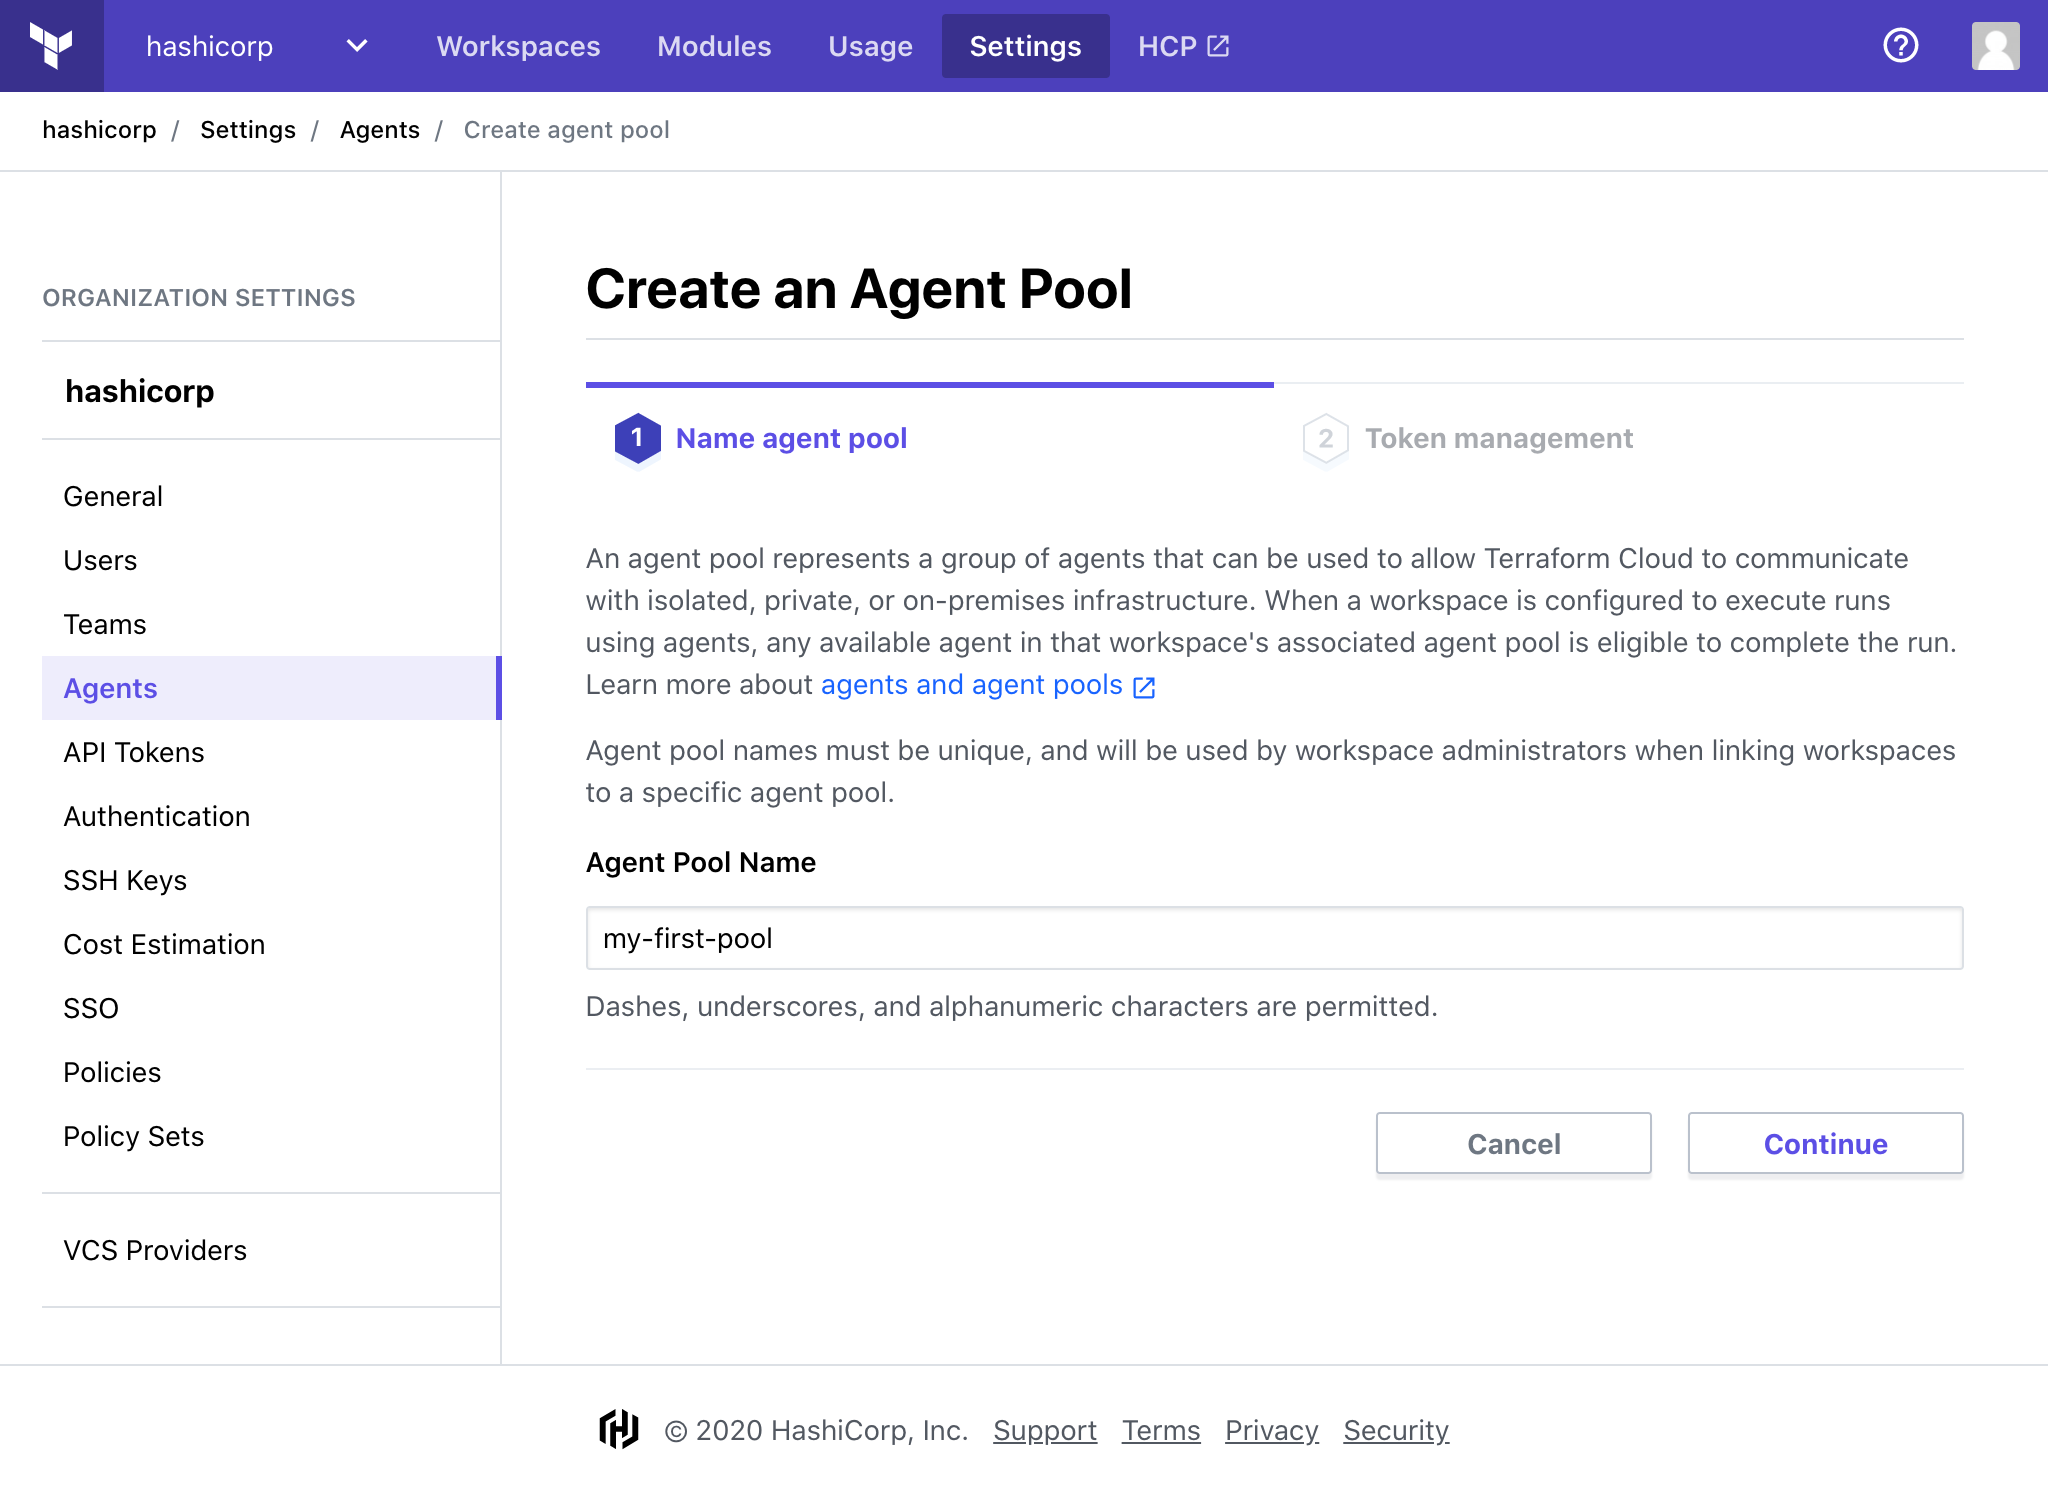 Screenshot: Step 1 of pool creation, naming the agent pool